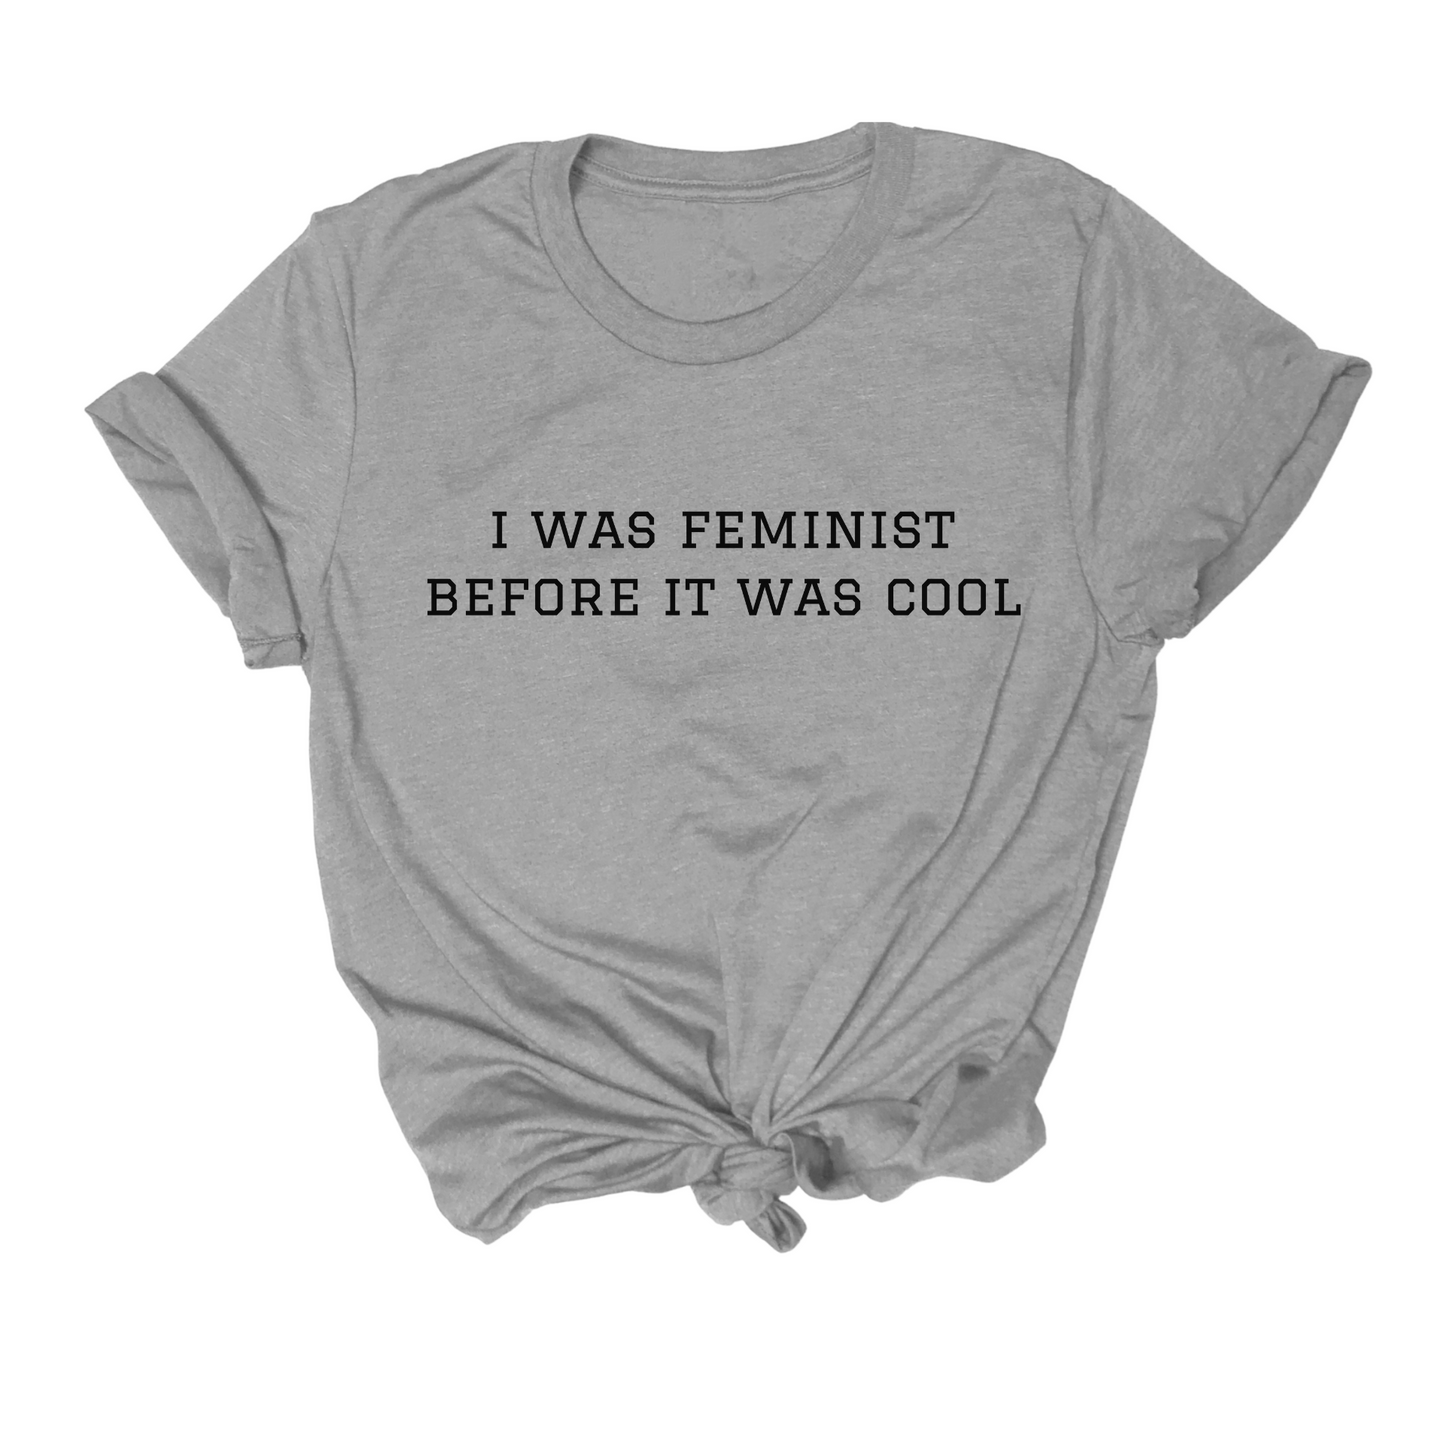 feminist themed tshirt that says I was feminist Before It Was Cool